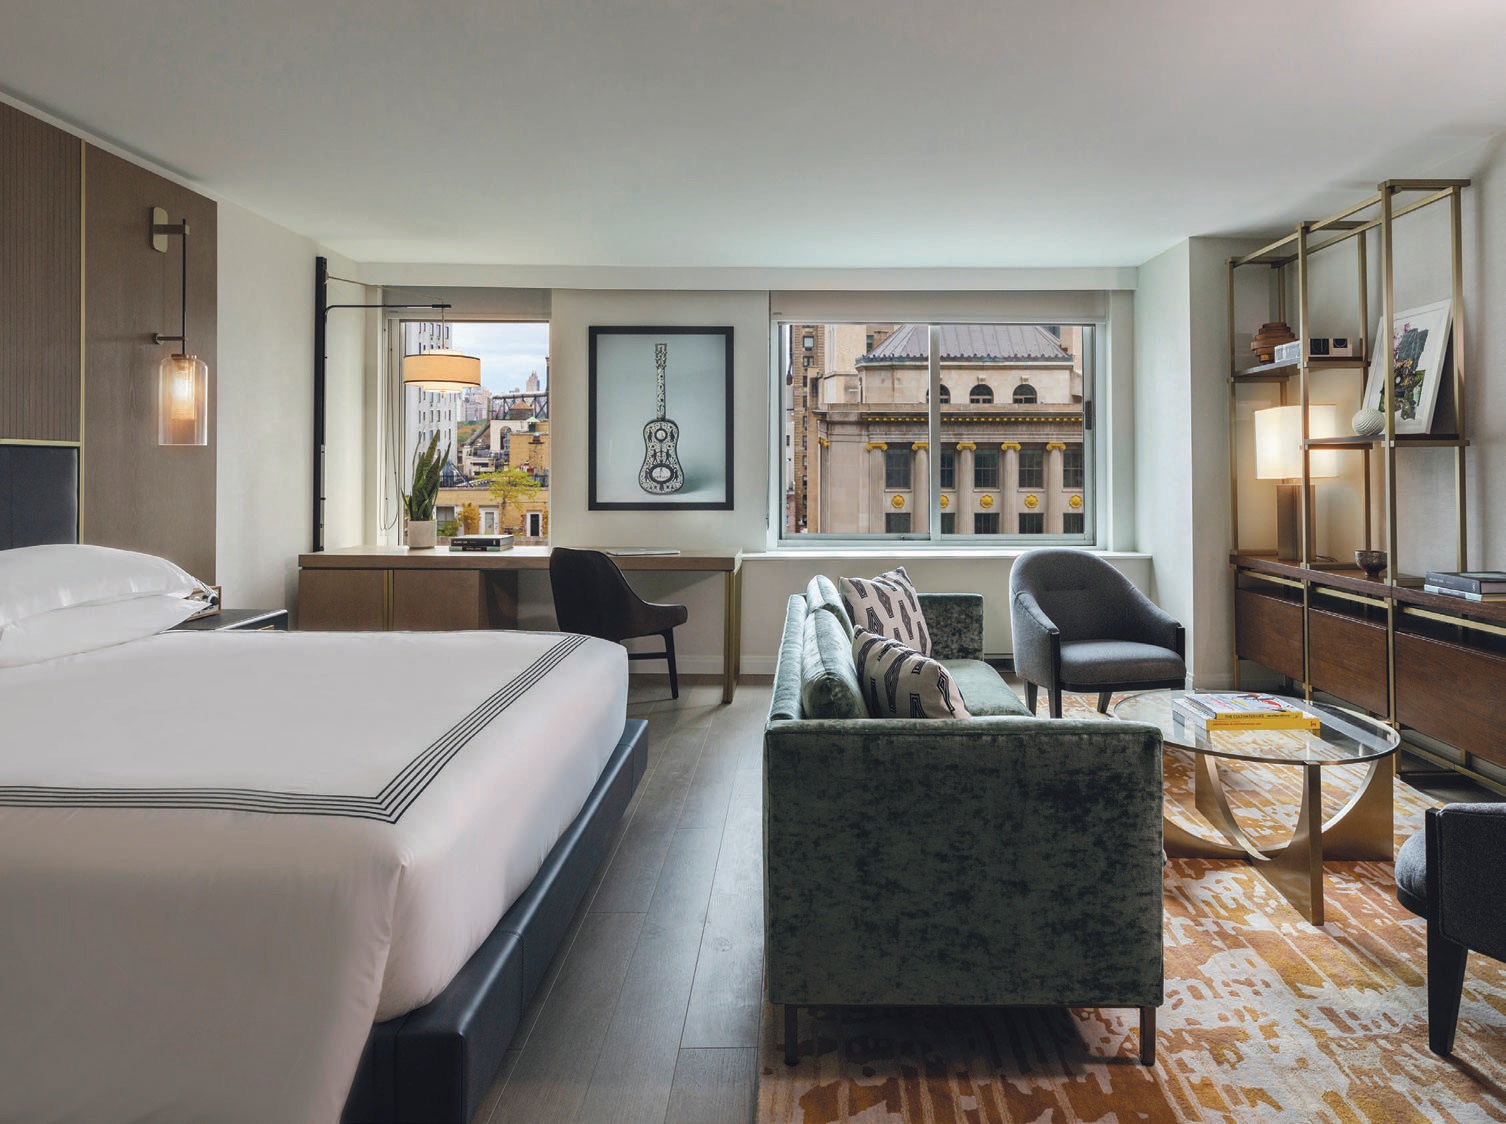 Thompson Central Park New York embodies the hotel brand’s signature touches of sophisticated design and refined flair. PHOTO COURTESY OF THOMPSON CENTRAL PARK NEW YORK